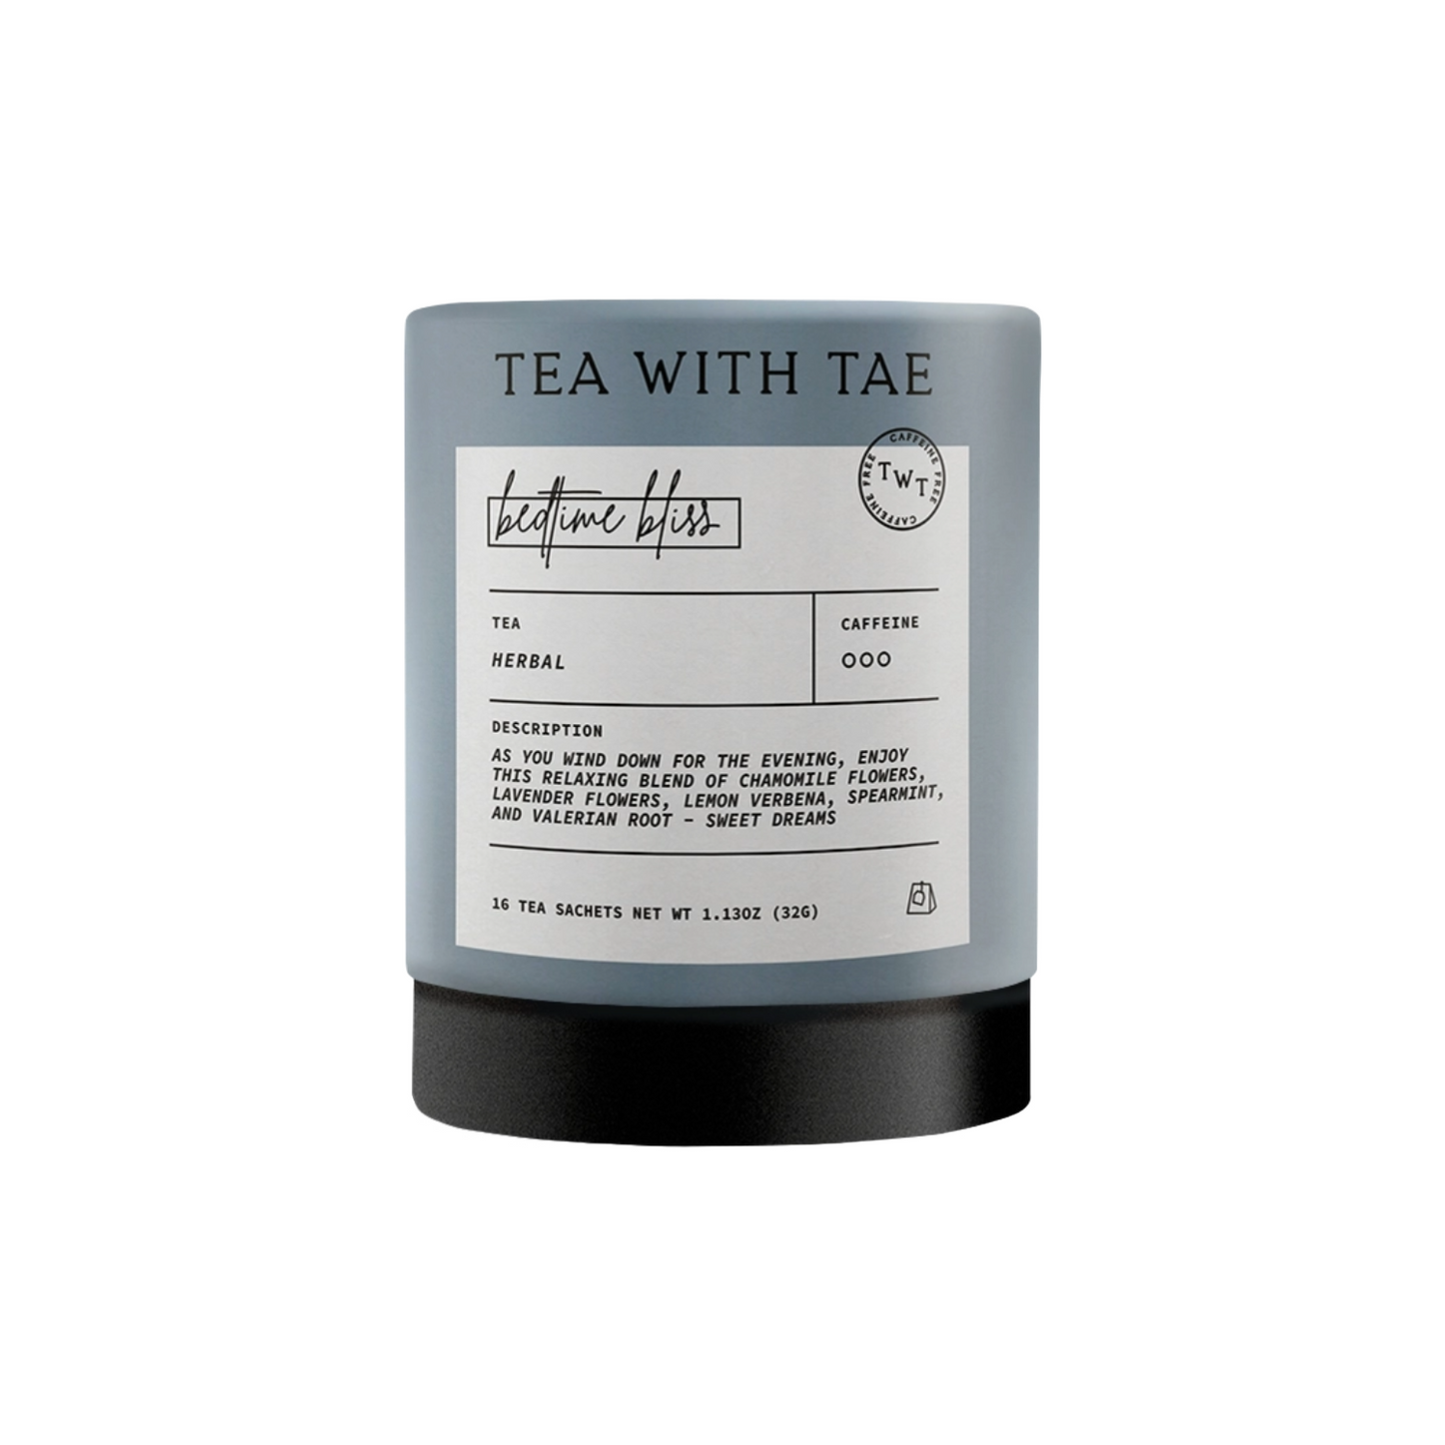 Bedtime Bliss Large Tea Tube by Tea with Tae